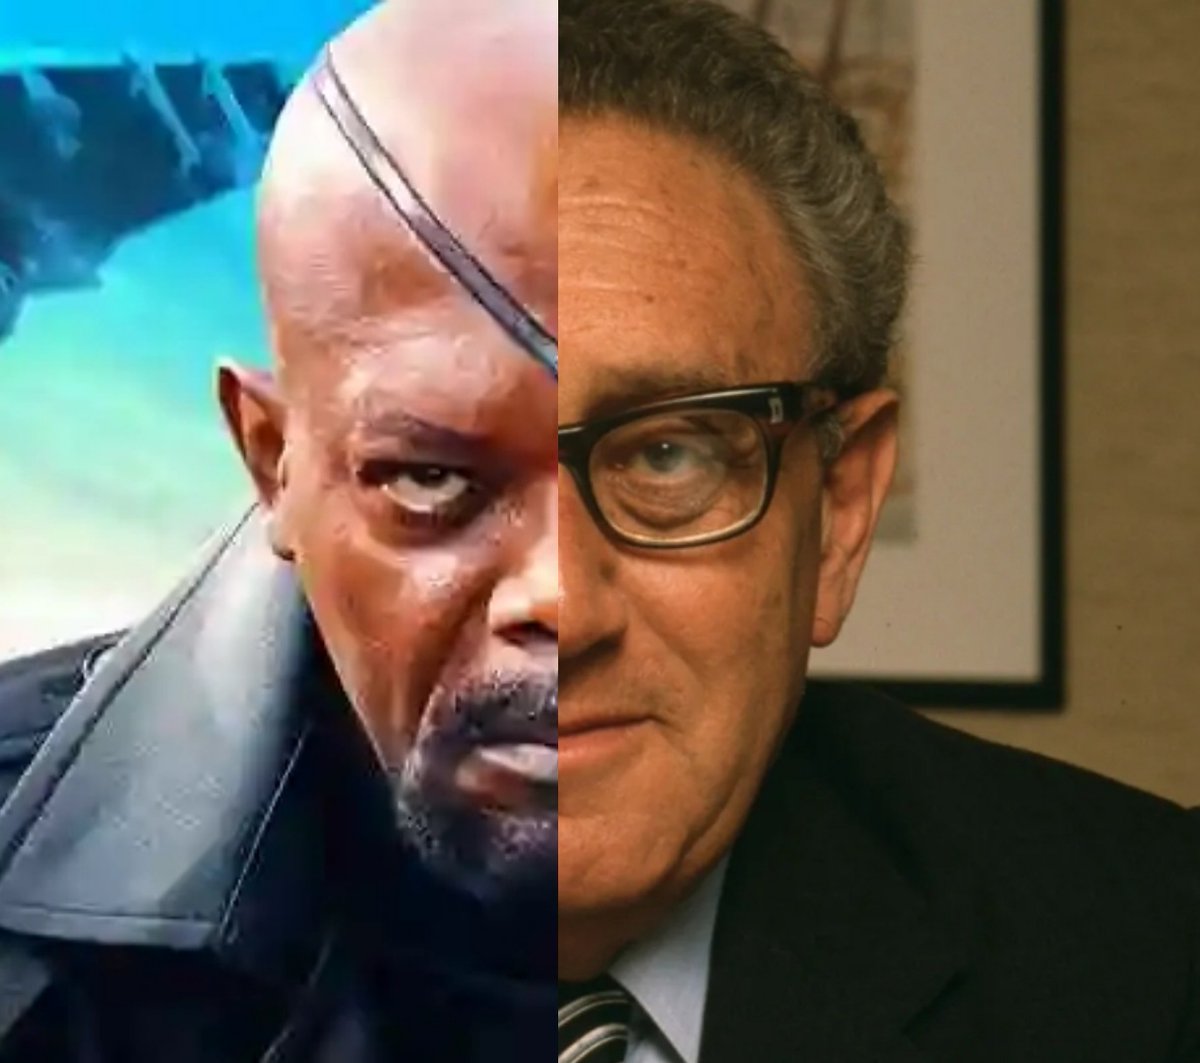 RIP to Henry Kissinger, America's very own Nick Fury. #RIP #MarvelMemes 

'That person who helps others simply because it should or must be done, and because it is the right thing to do, is indeed without a doubt, a real superhero.' - Stan Lee